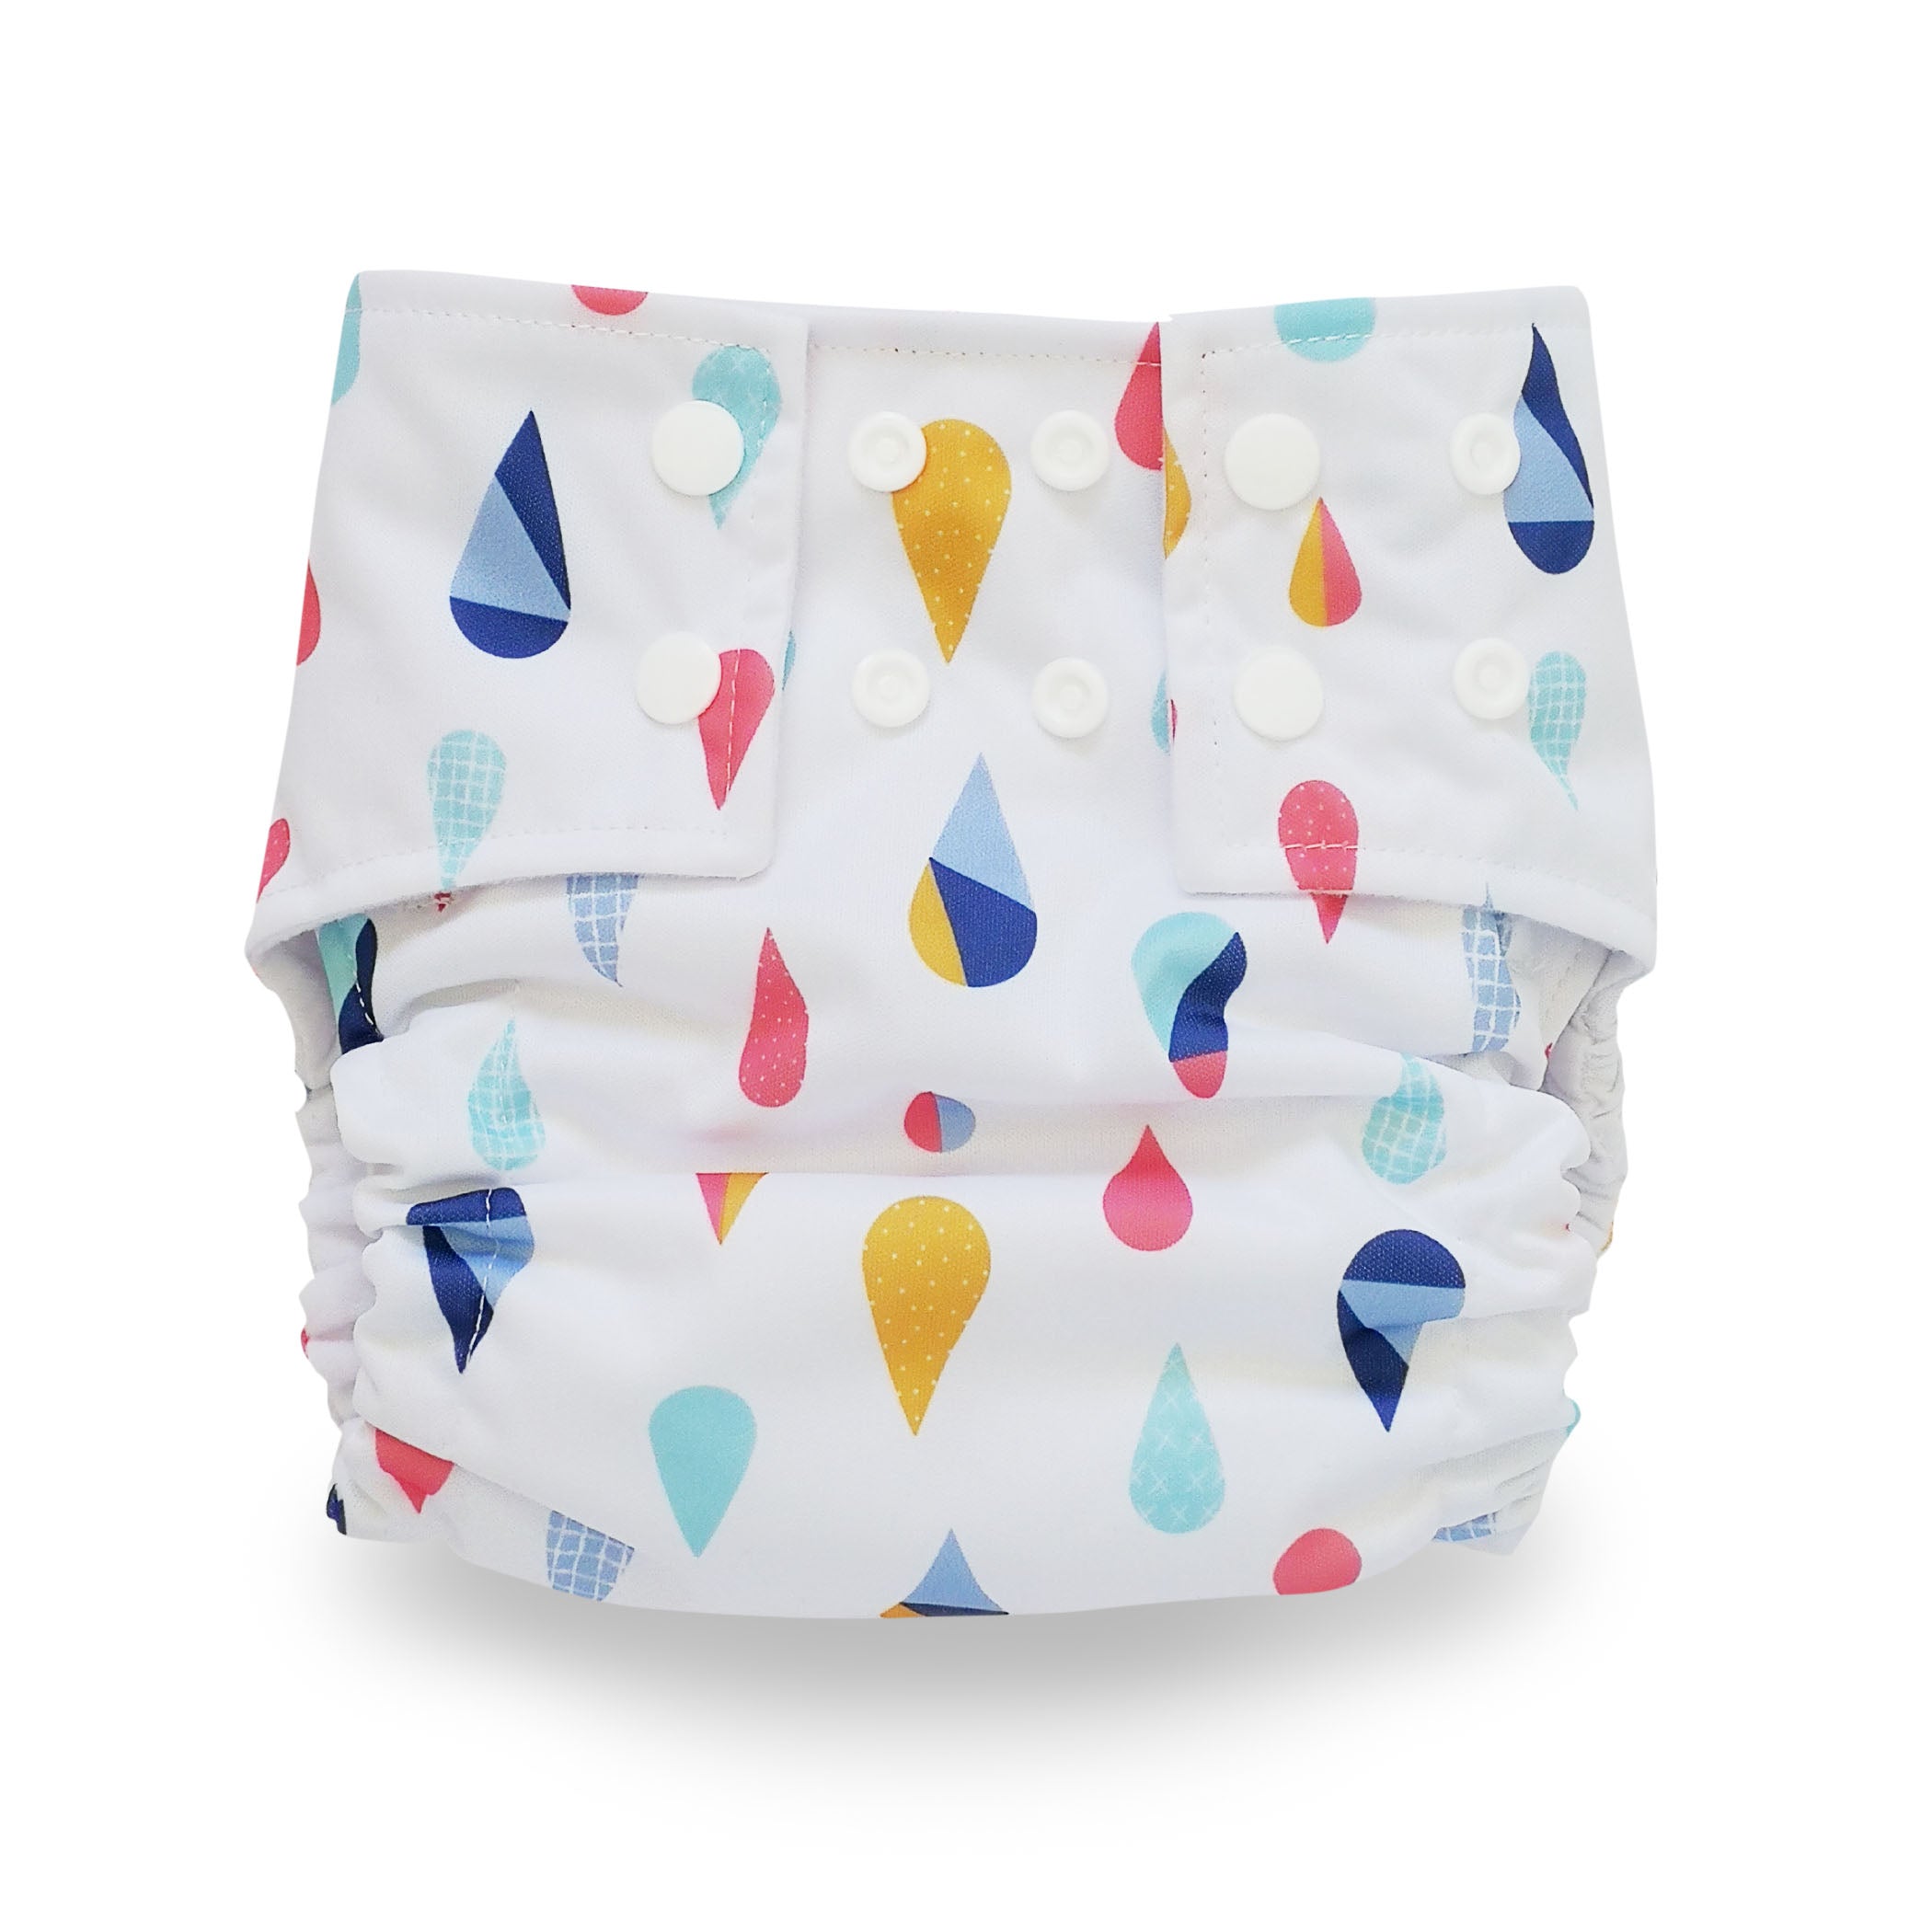 Plum Reusable Cloth Nappy & Bamboo Liner